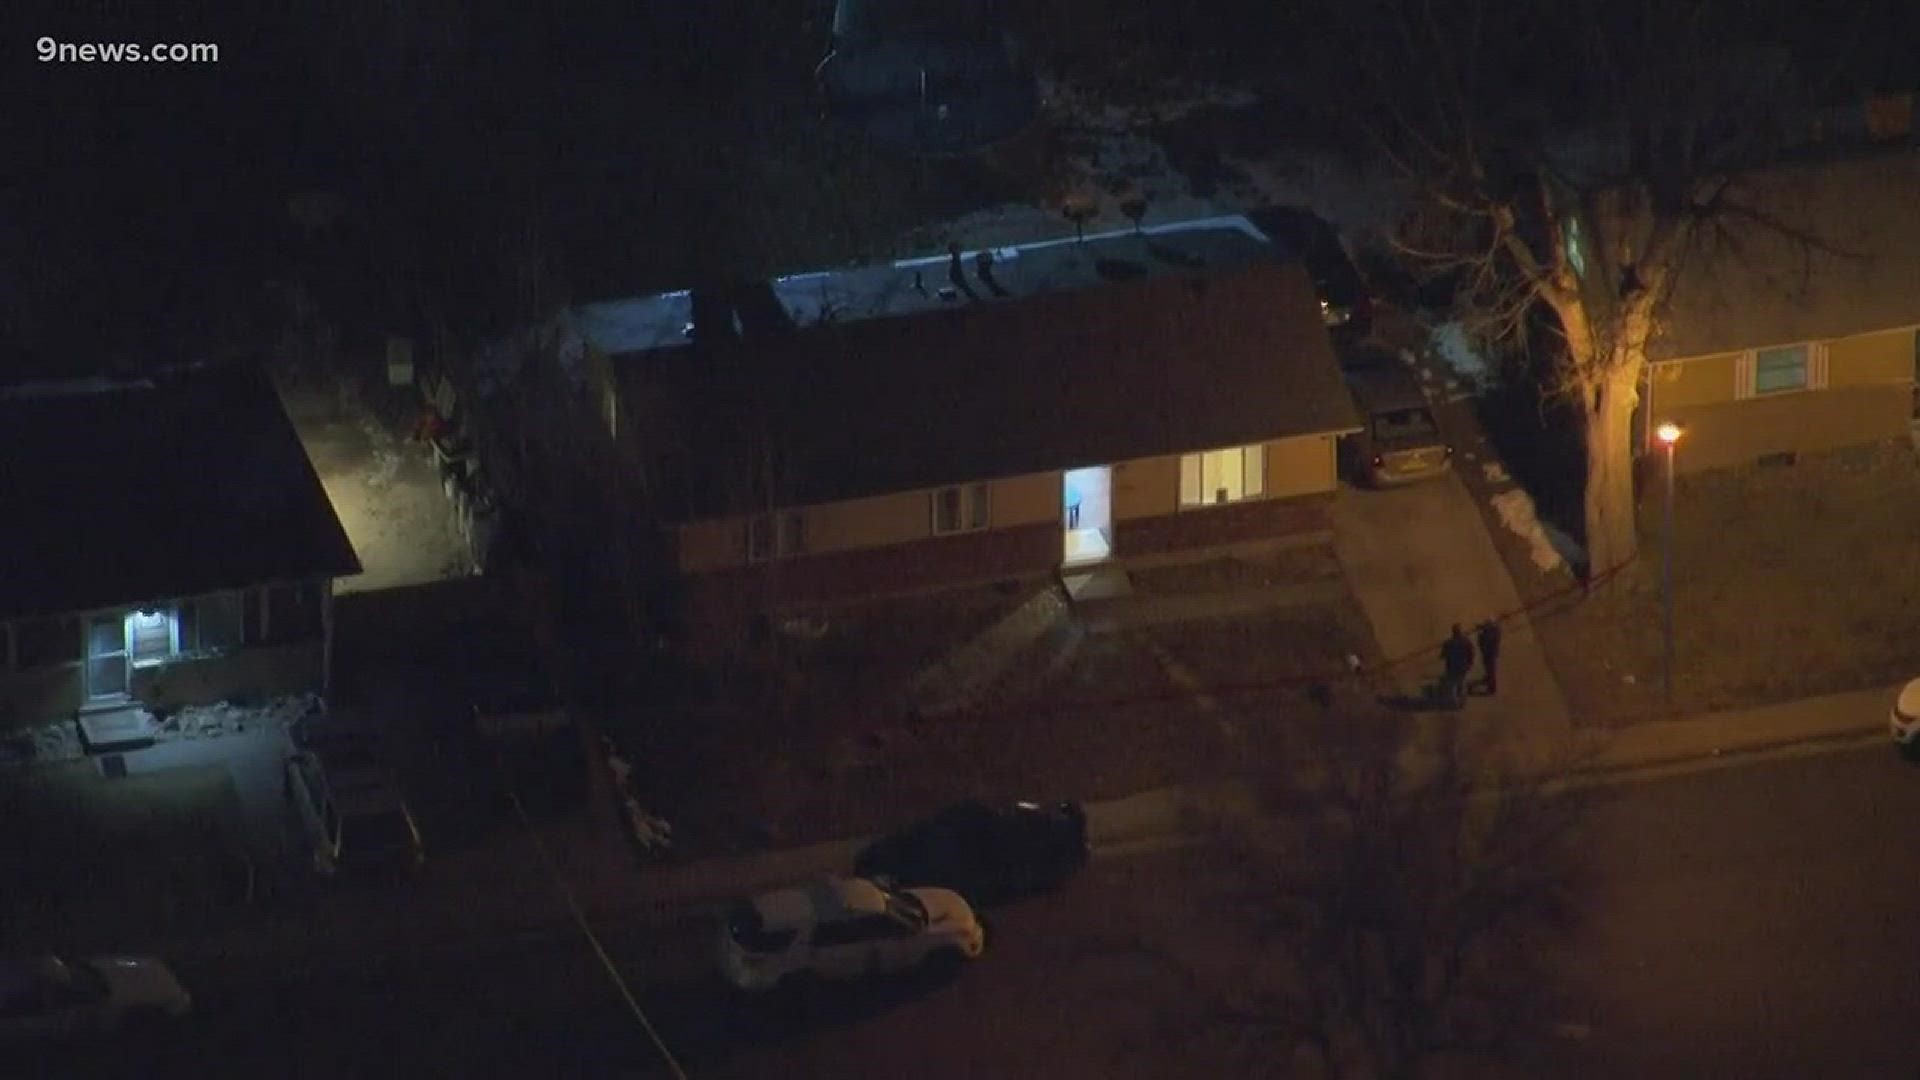 Denver police have identified the man who was shot Tuesday night after a domestic violence call.